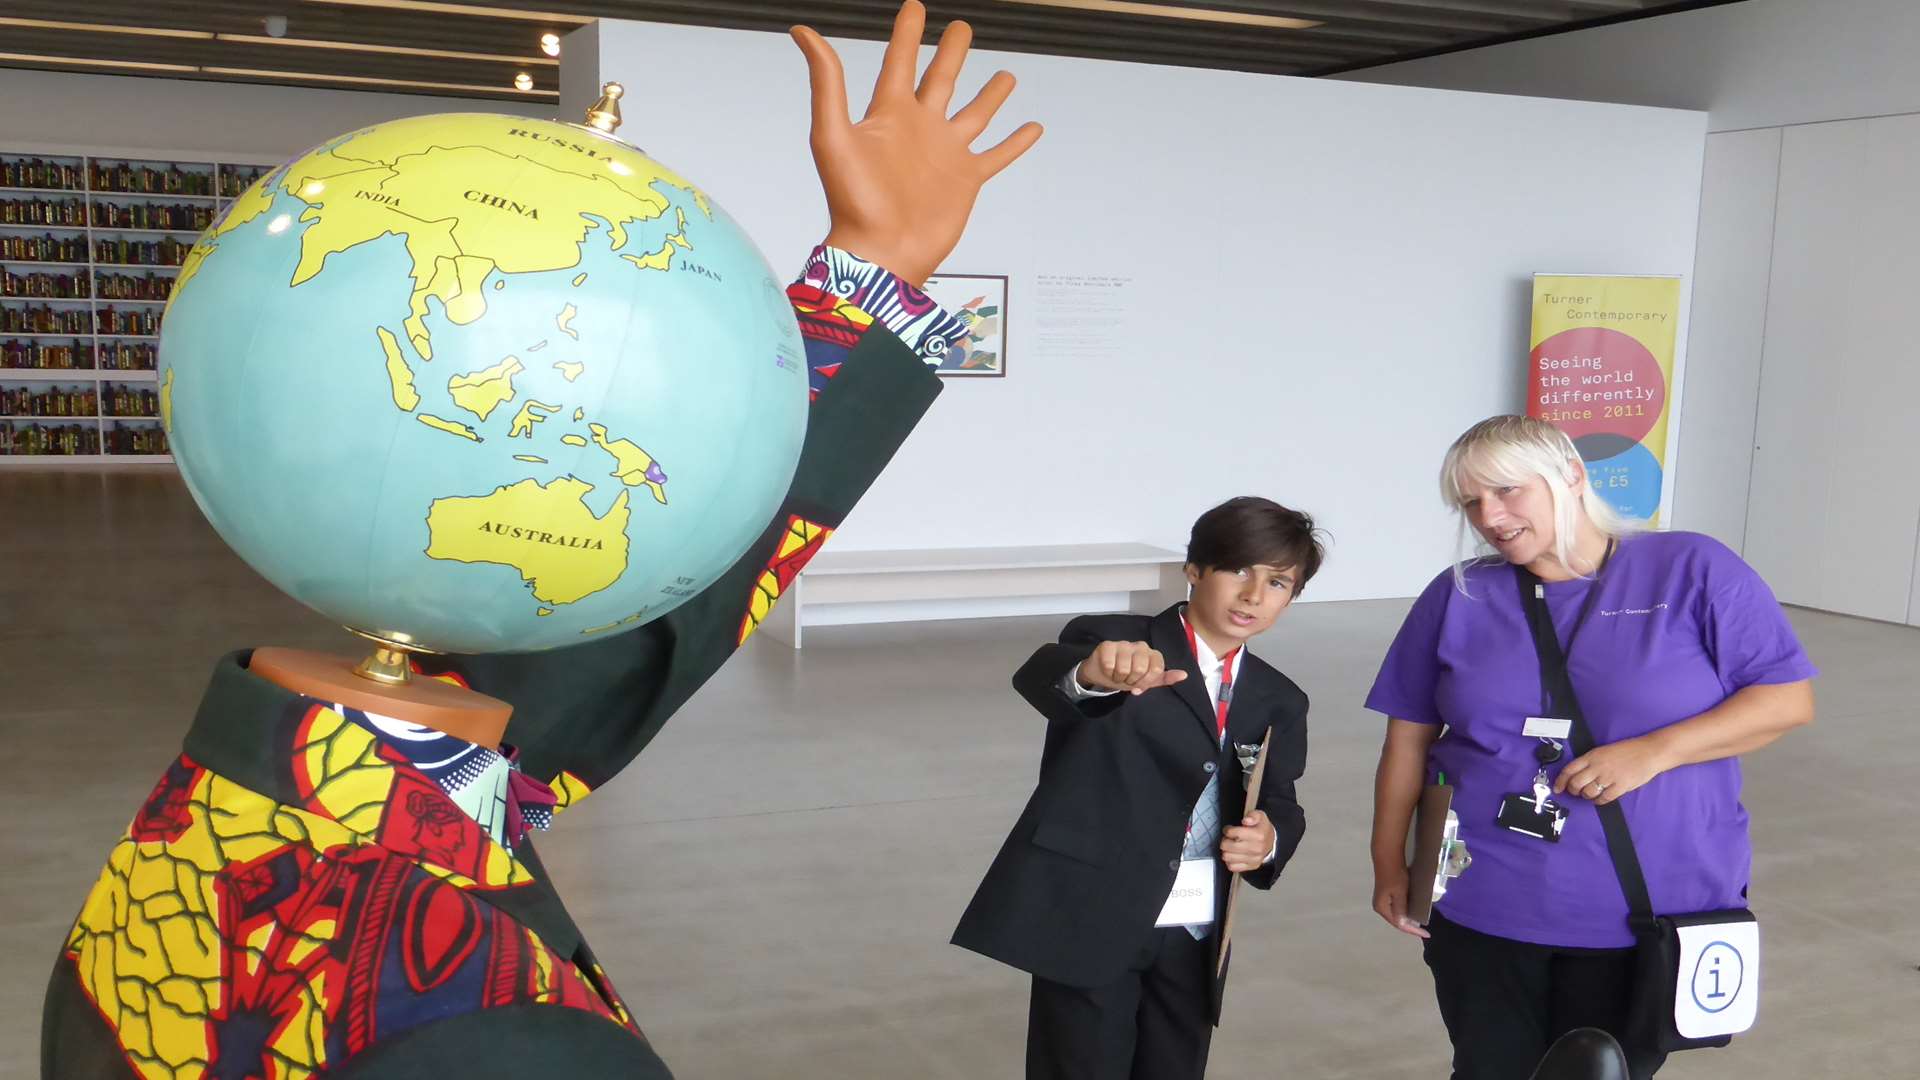 Jack Dunning, 11, of Ash, takes up his role as boss of the Turner Contemporary after winning the KM Charity Team's creative writing competition to promote green travel to school.